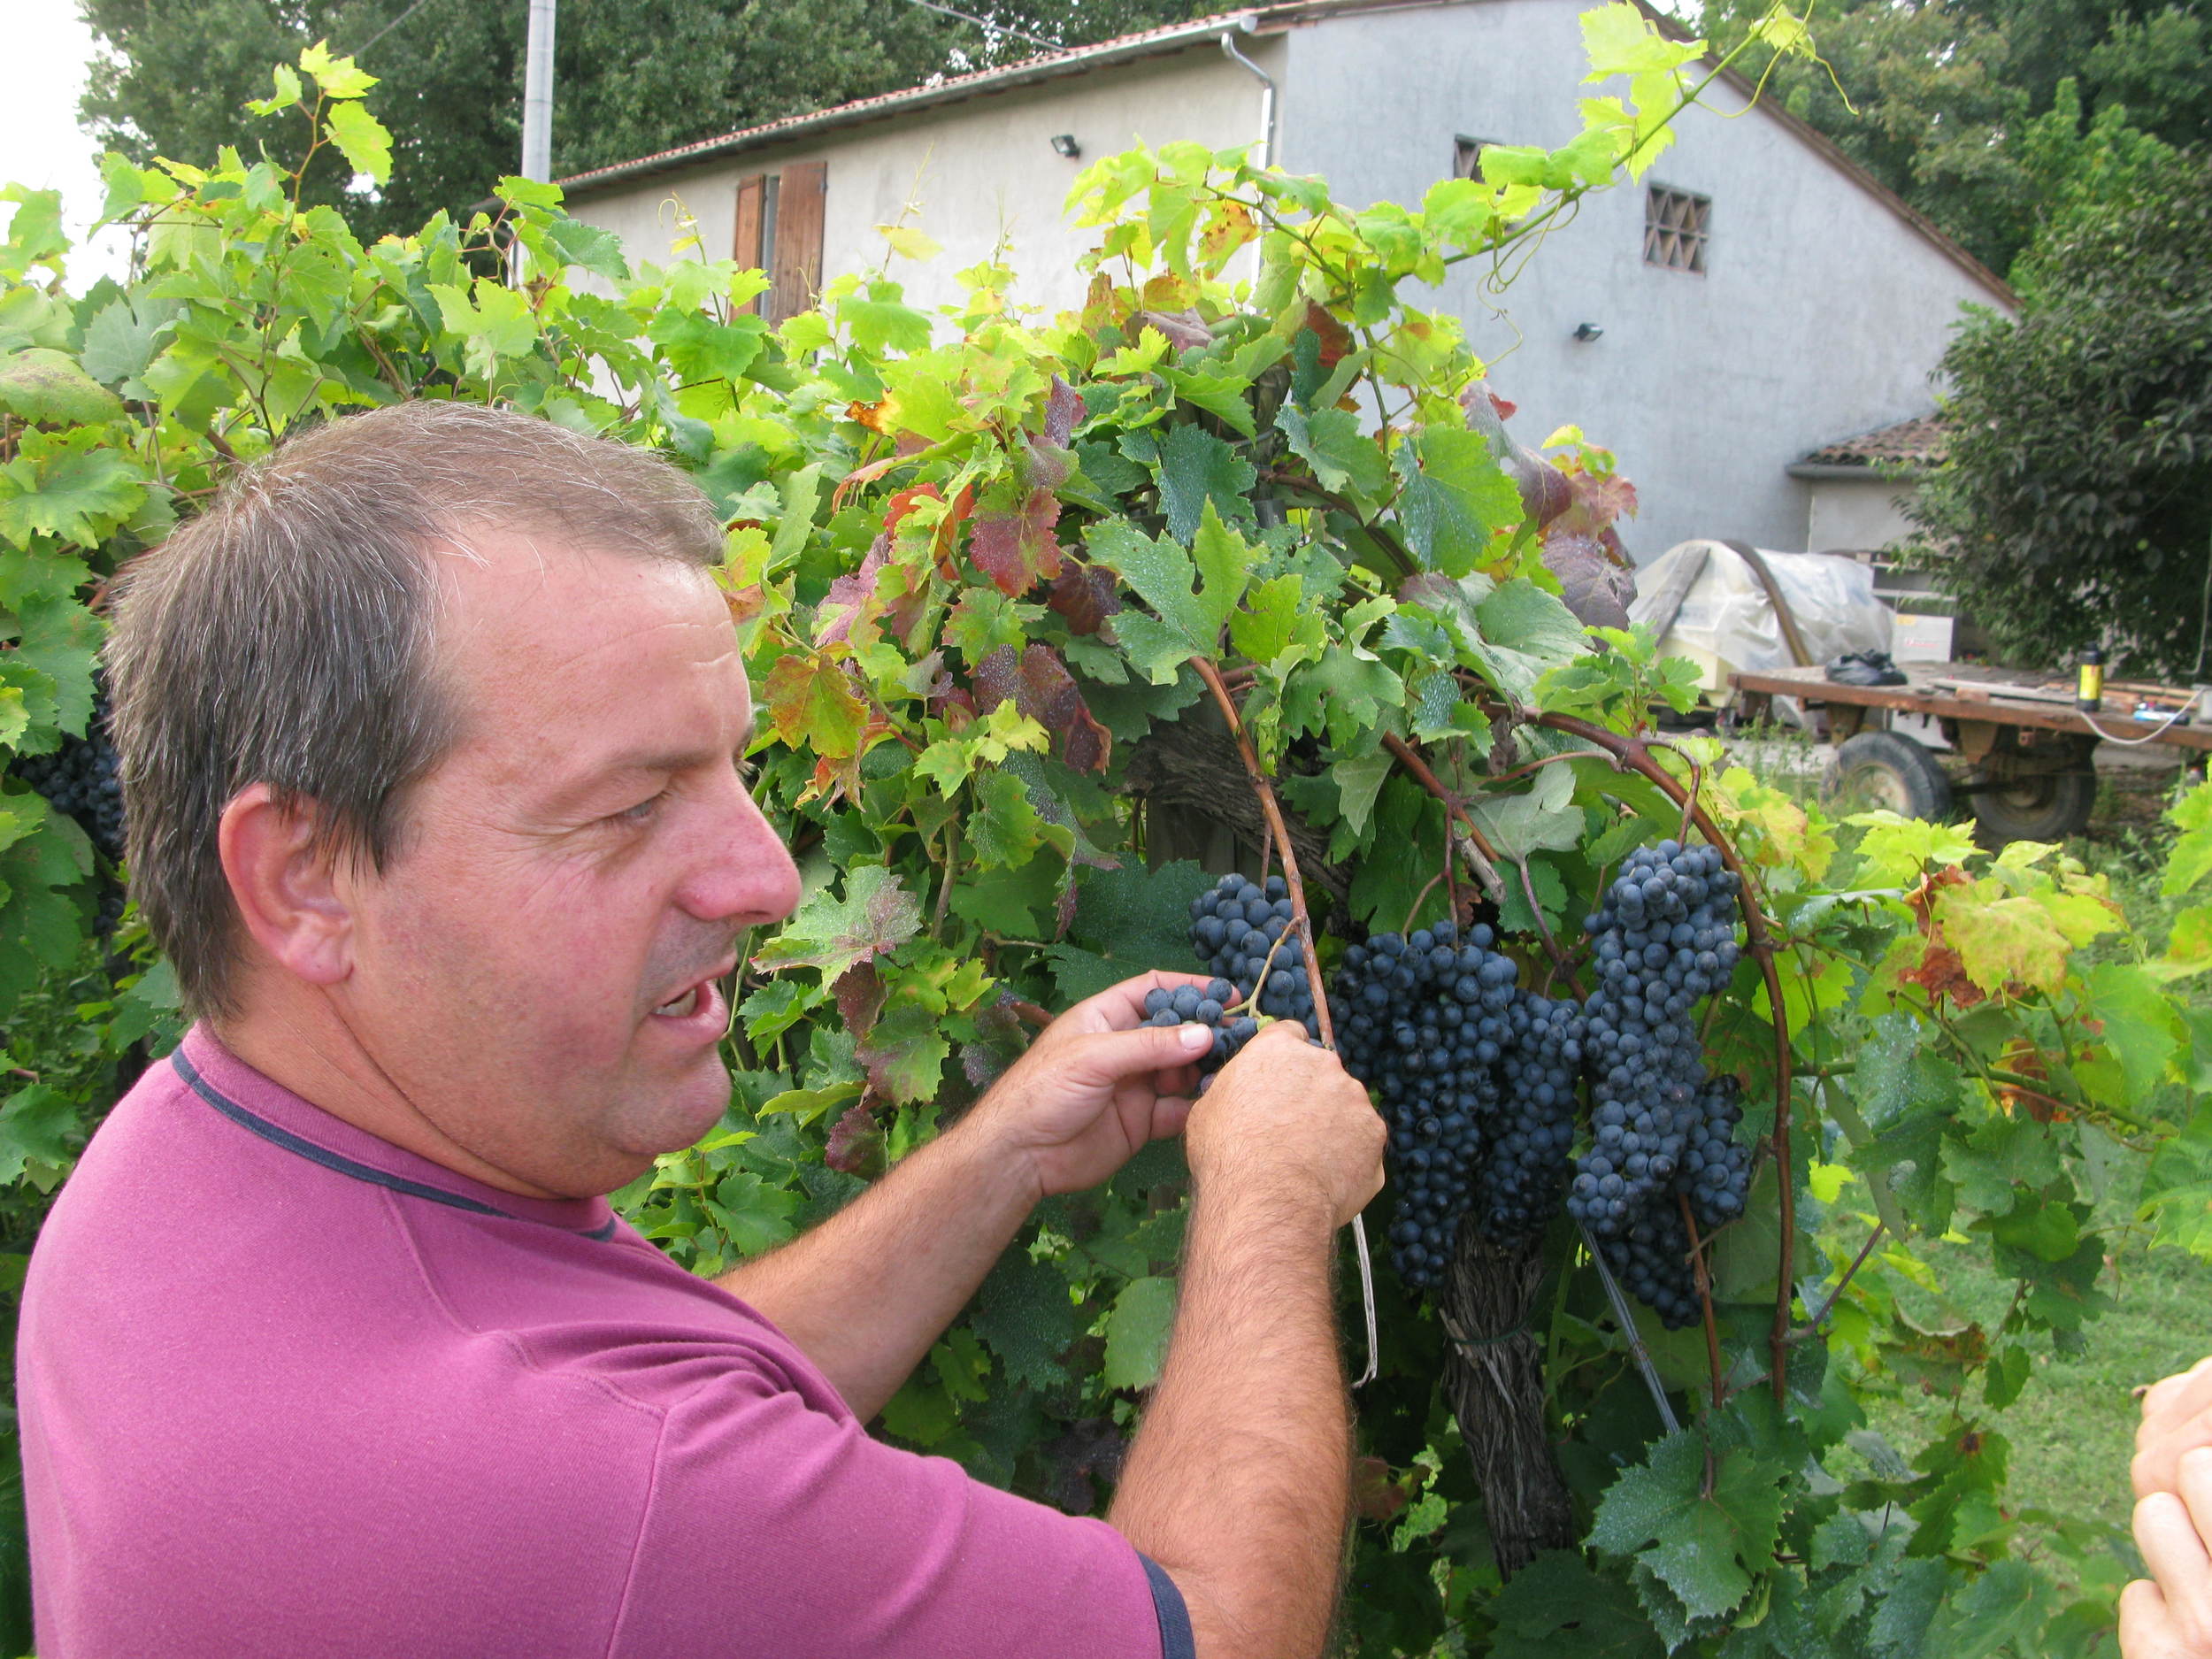 Daniele Longanesi: His grandfather had a grape variety named after him